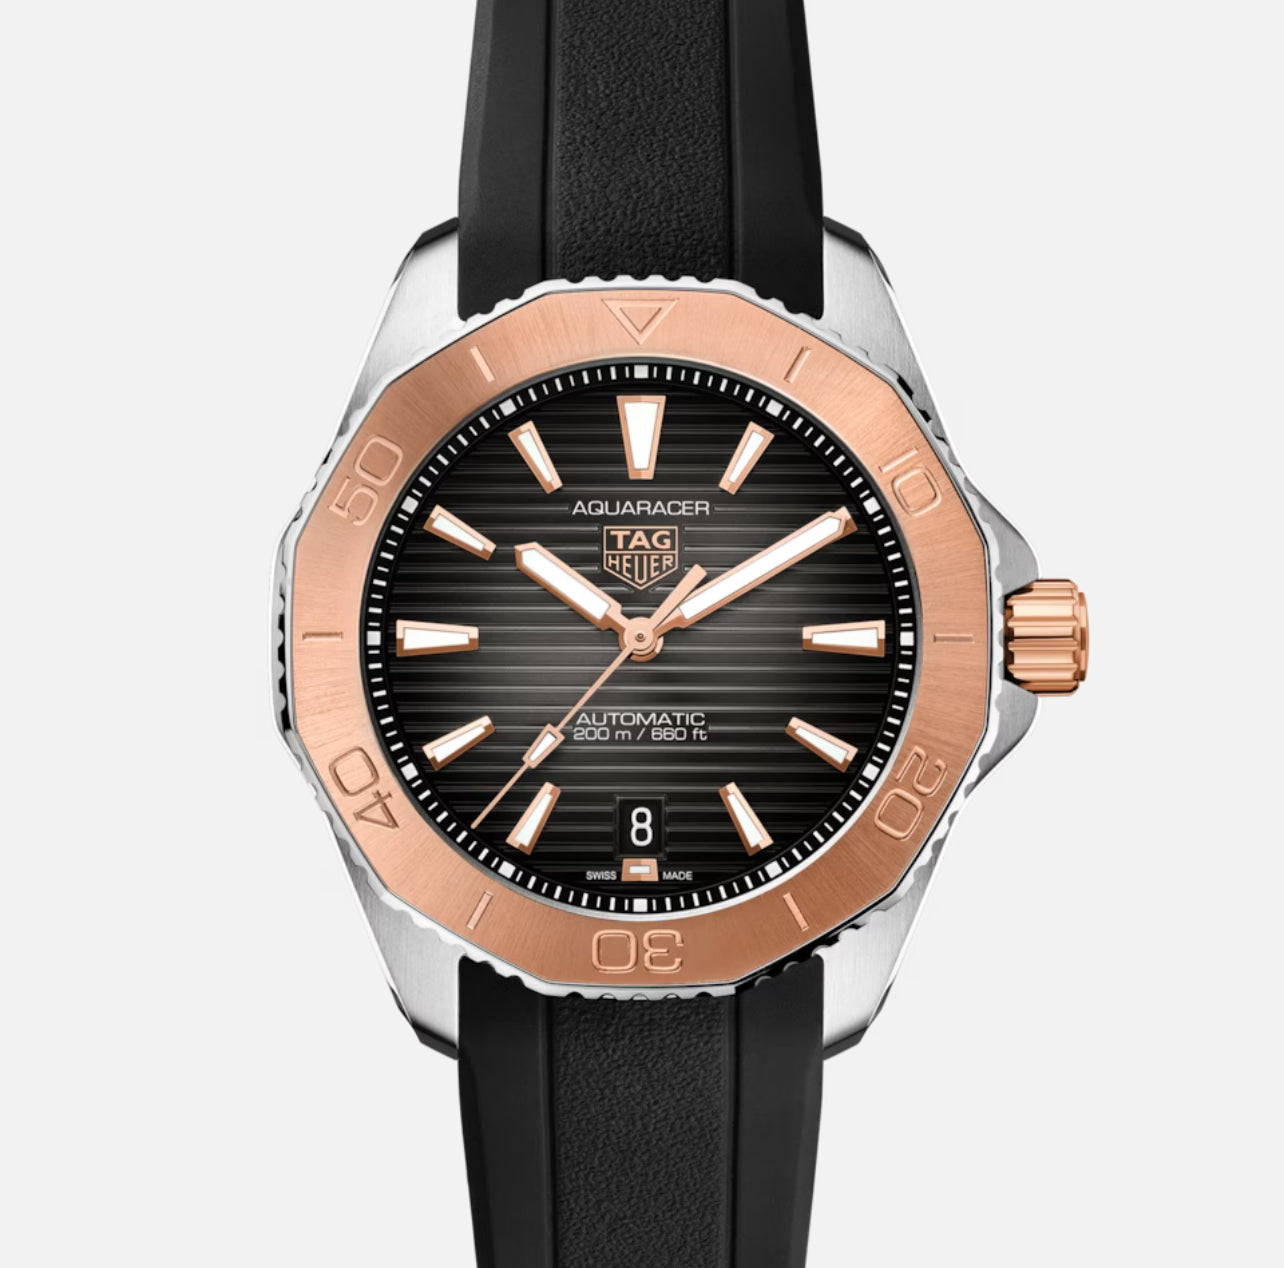 TAG HEUER-AQUARACER
PROFESSIONAL 200 DATE
Automatic, 40 mm, Steel and Gold
WBP2151.FT6199